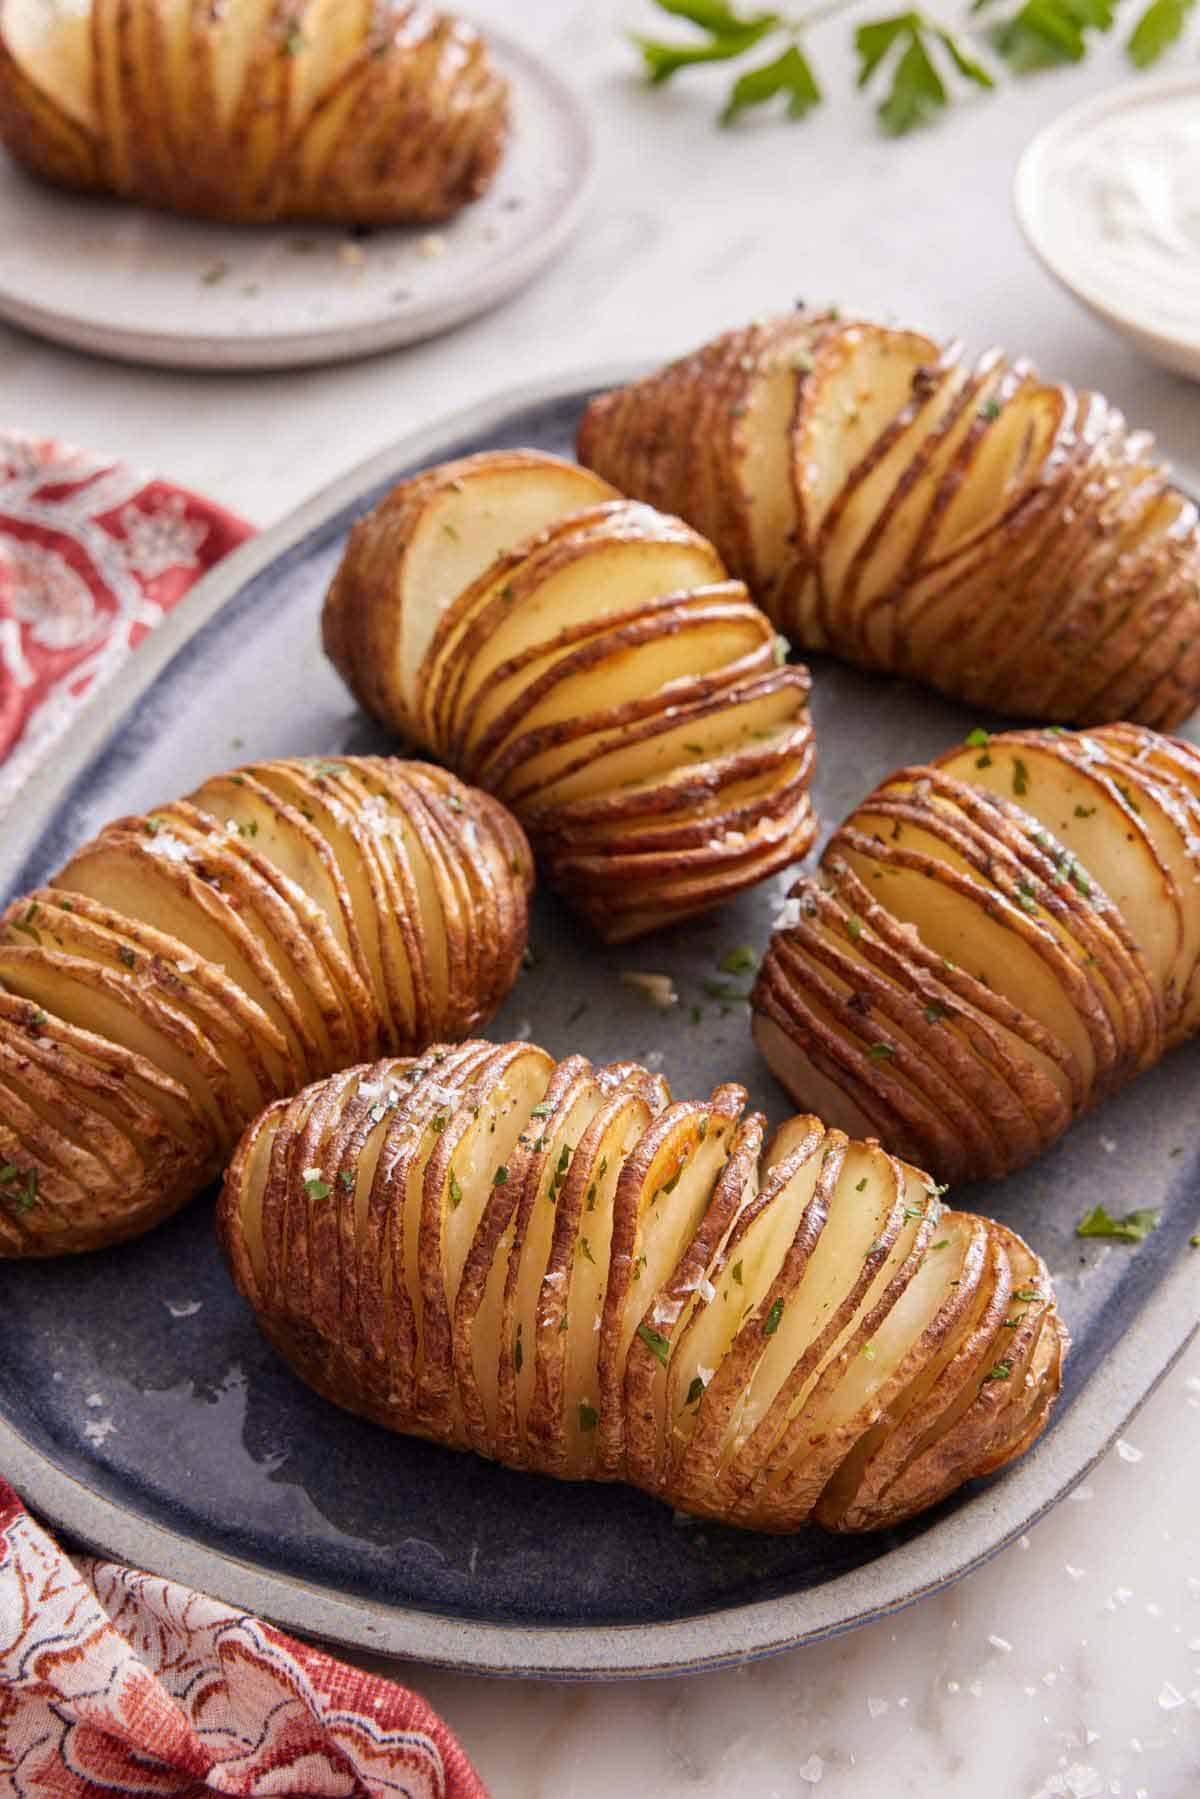 A platter with five hasselback potatoes with another on a plate in the background.